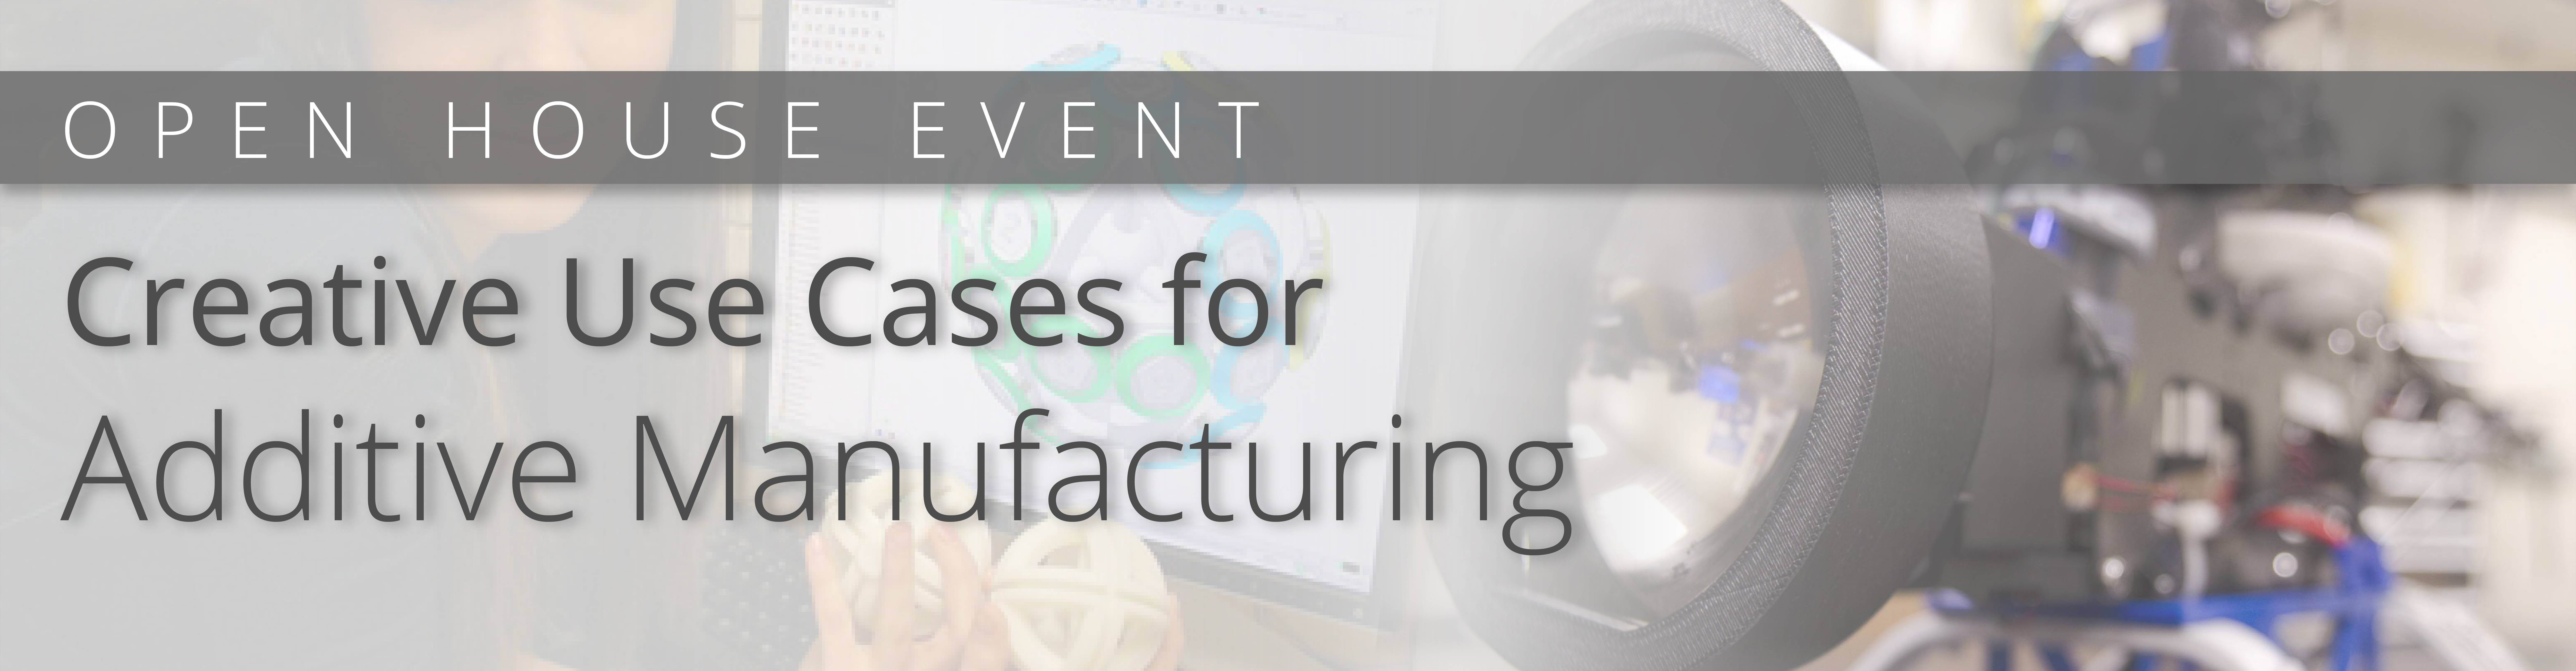 additive-manufacturing-in-medicine-open-house